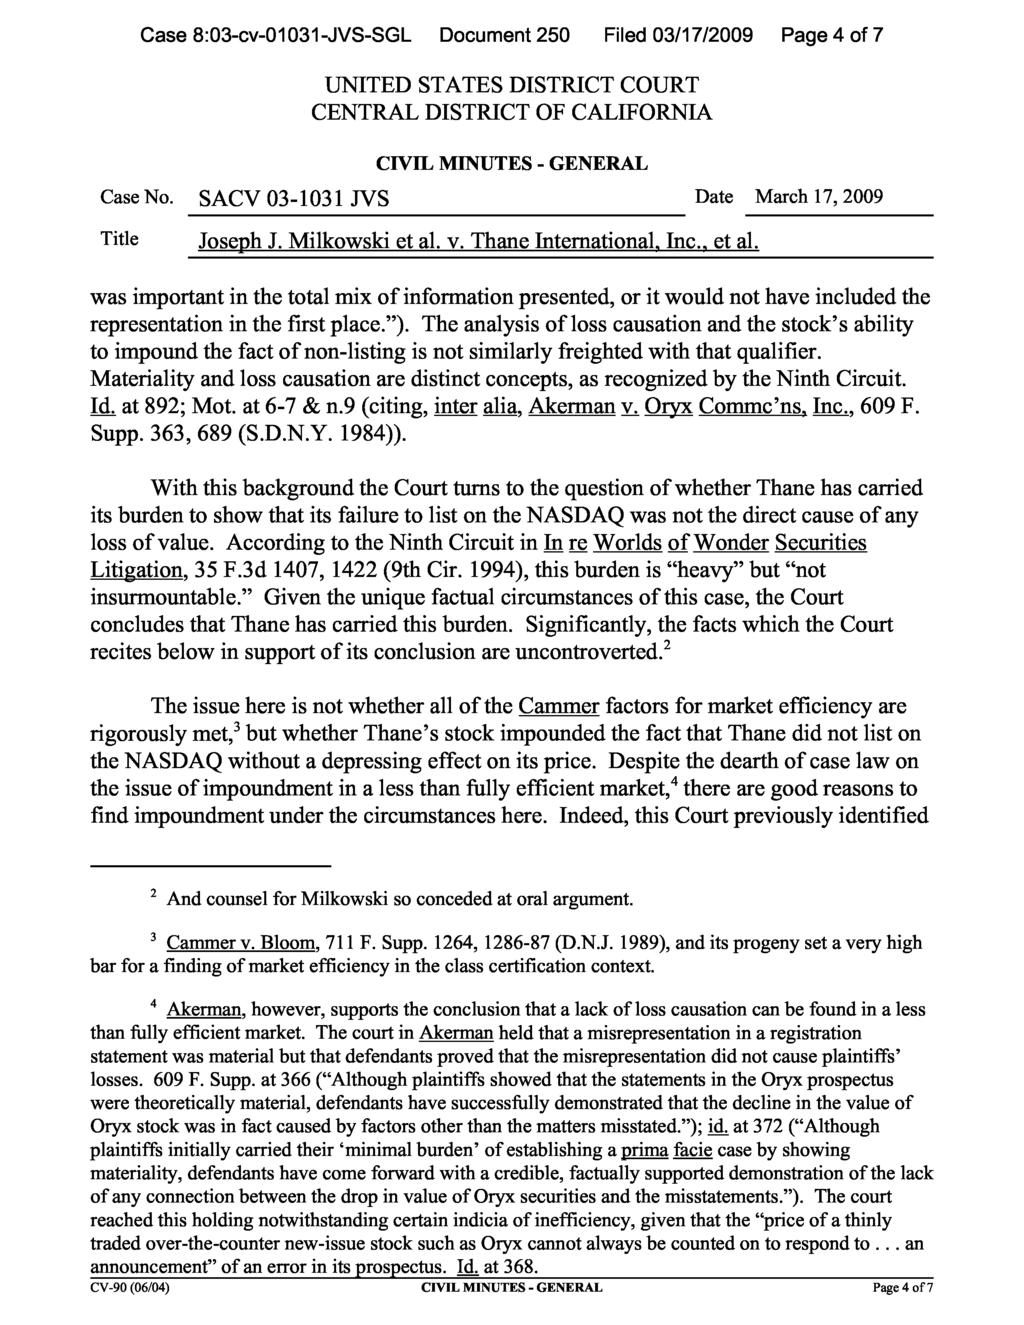 Case 8:03-cv-01031-JVS-SGL Document 250 Filed 03/17/2009 Page 4 of 7 was important in the total mix of information presented, or it would not have included the representation in the first place. ).